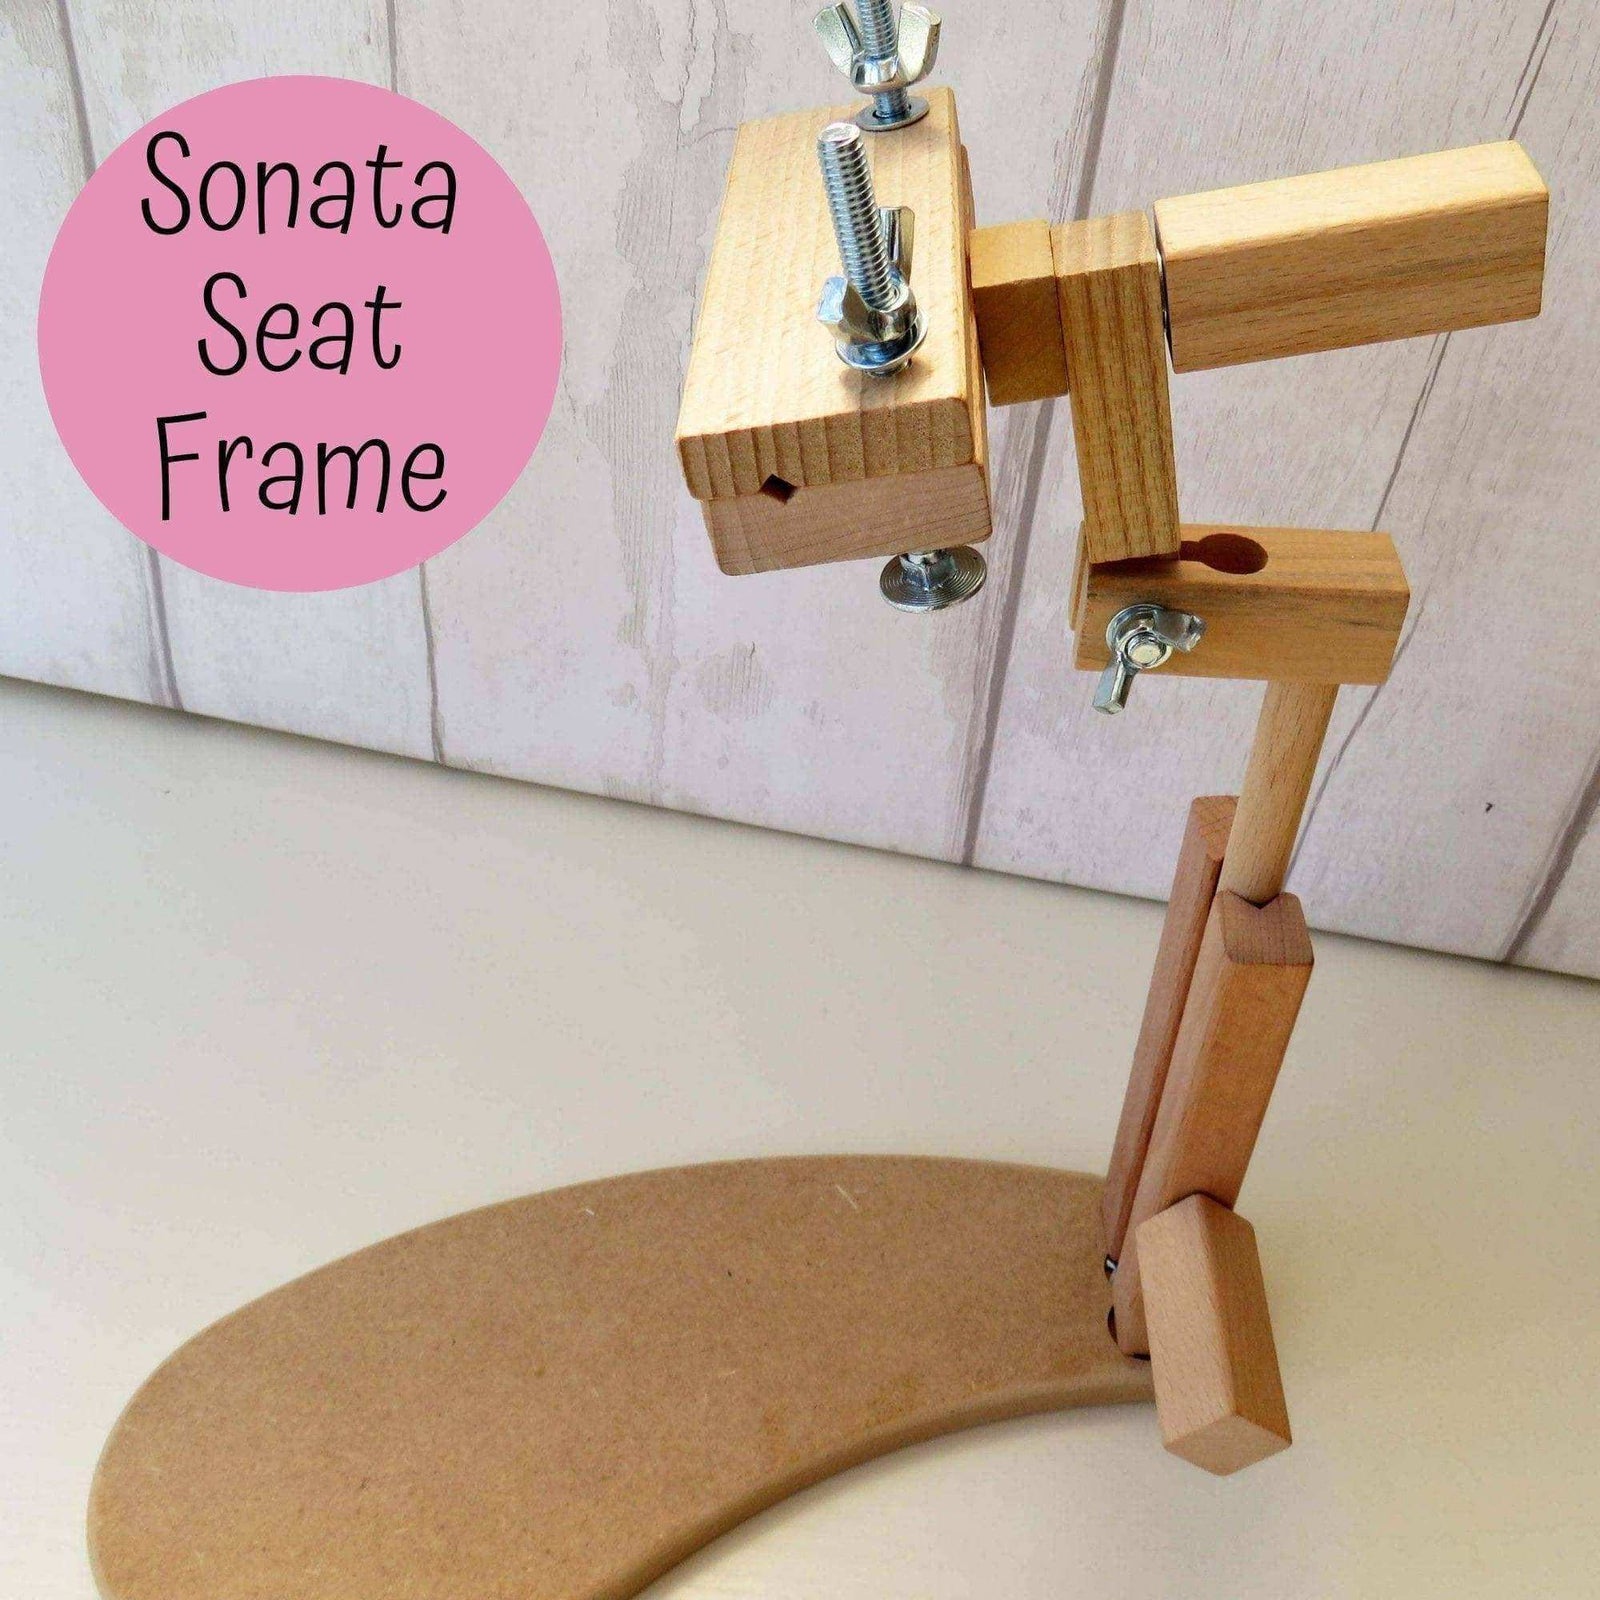 Siesta Sonata Seat Frame made from high quality wood , Embroidery Supplies , StitchDoodles , embroidery hoop, embroidery hoop kit, embroidery kit for adults, embroidery kit for beginers, hand embroidery, sonata seat stand , StitchDoodles , shop.stitchdoodles.com